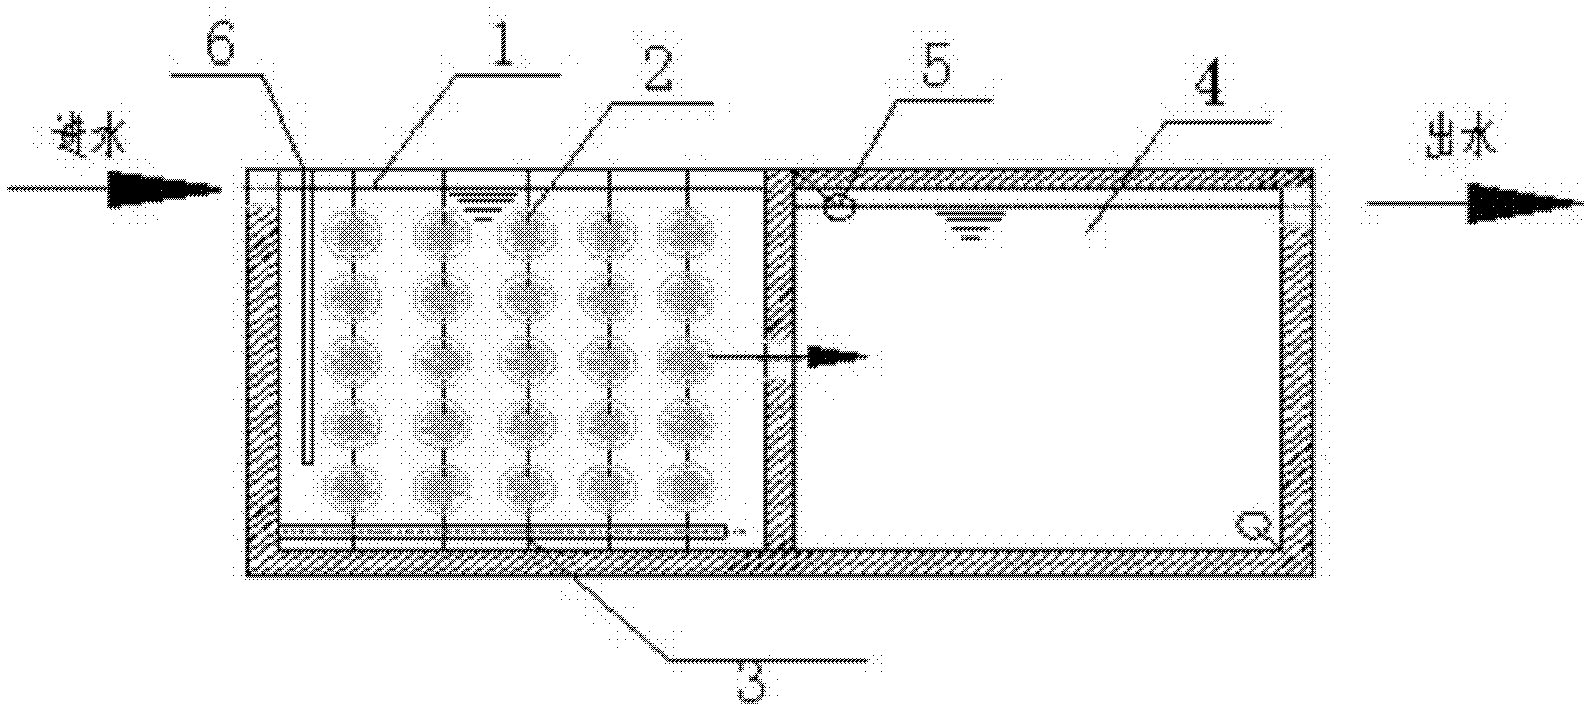 Method for treating and printing and dyeing wastewater by using hydrolysis tank